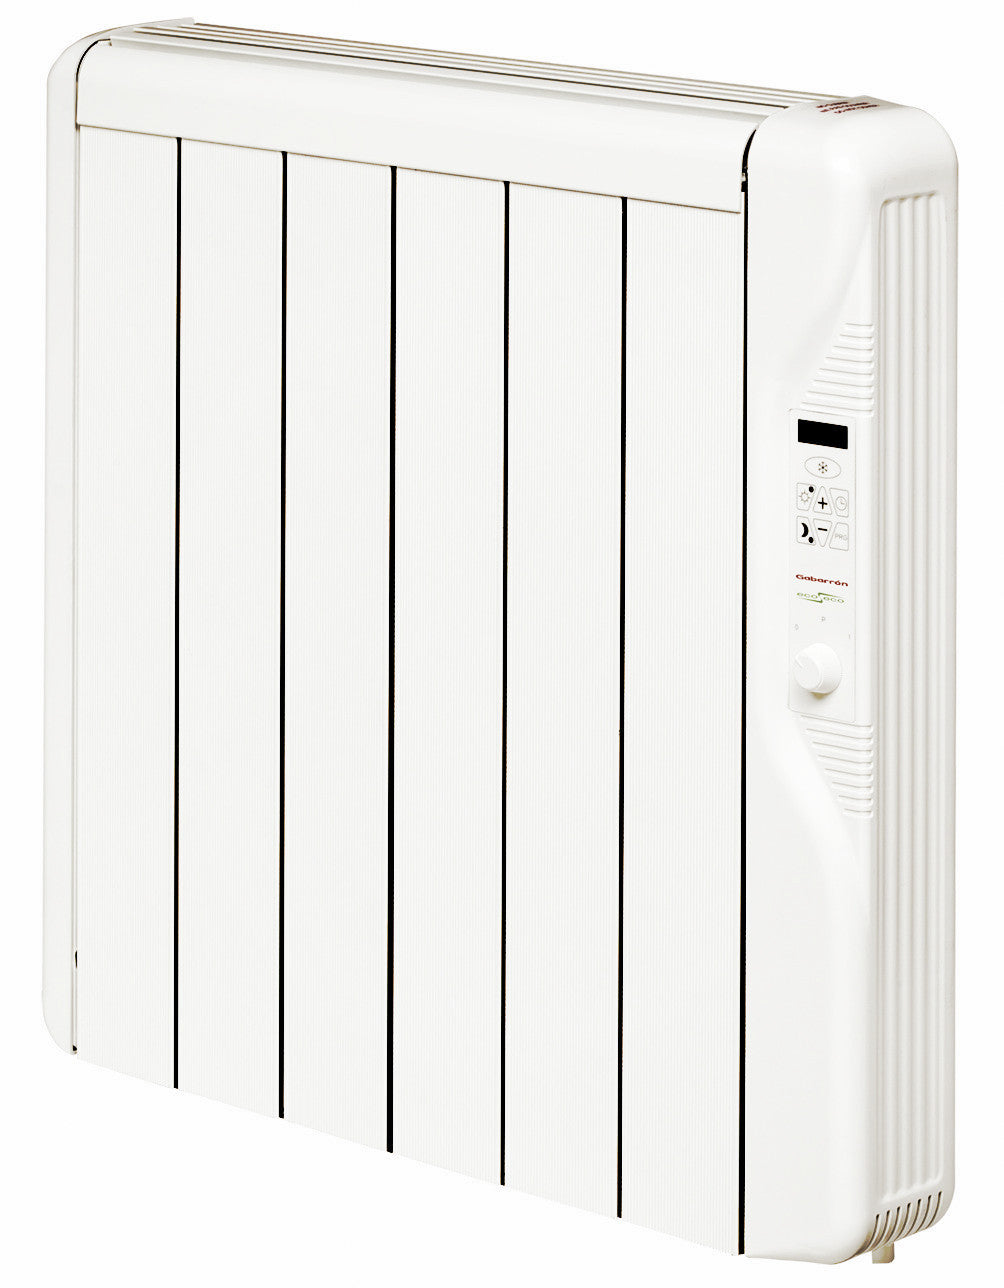 elnur rxe electric radiator with single room control